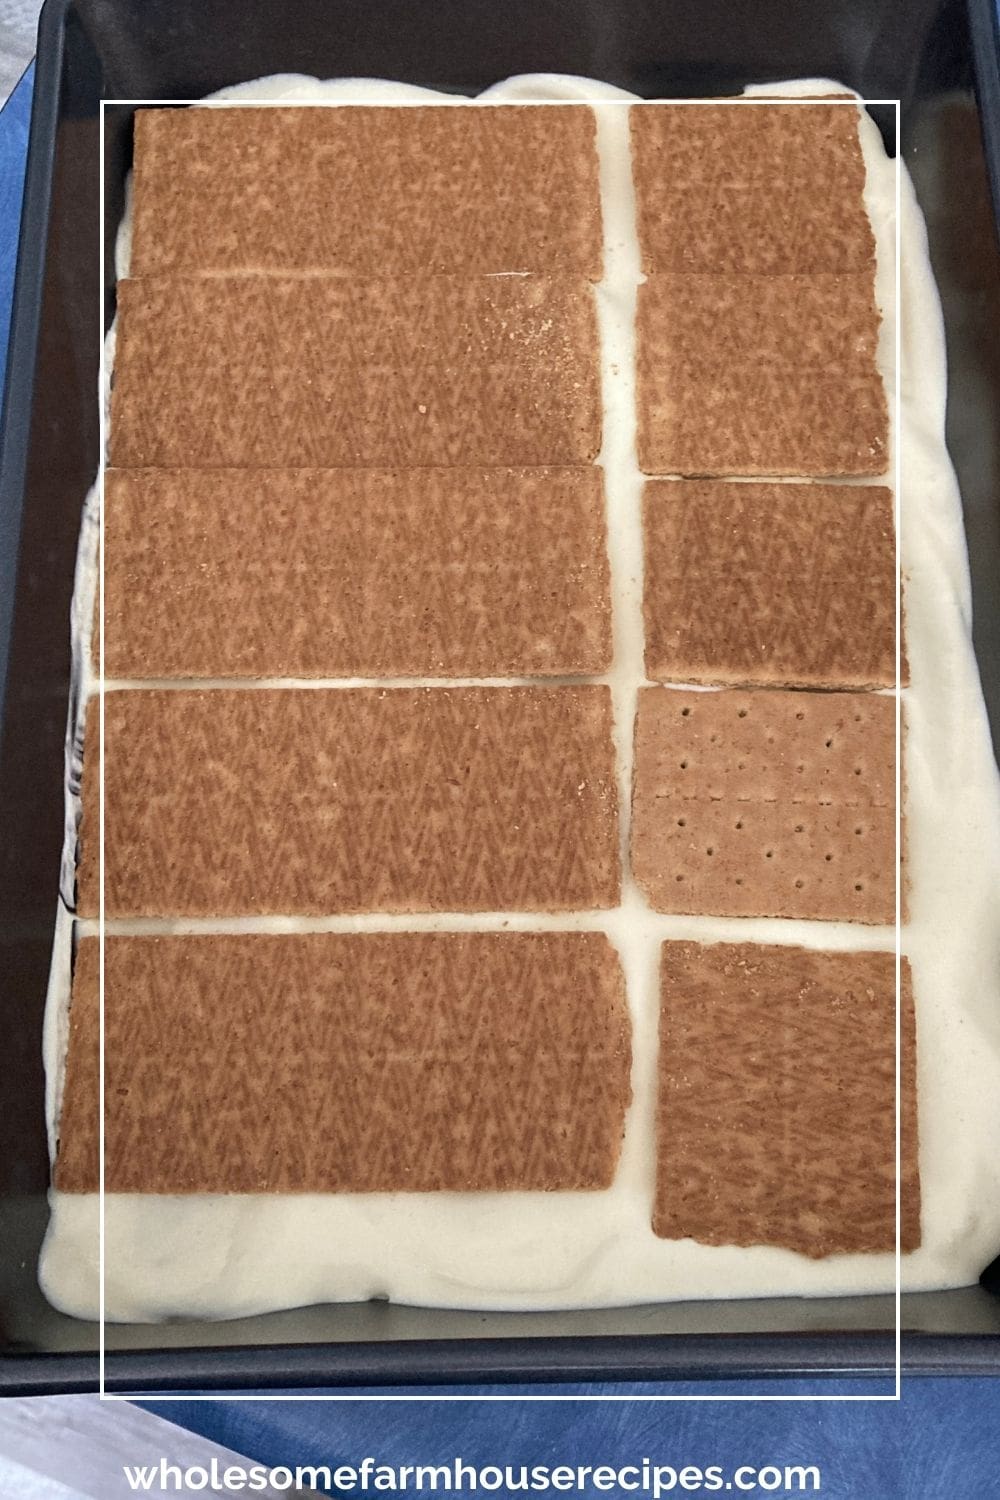 Layering Graham Crackers Over Pudding Mixture